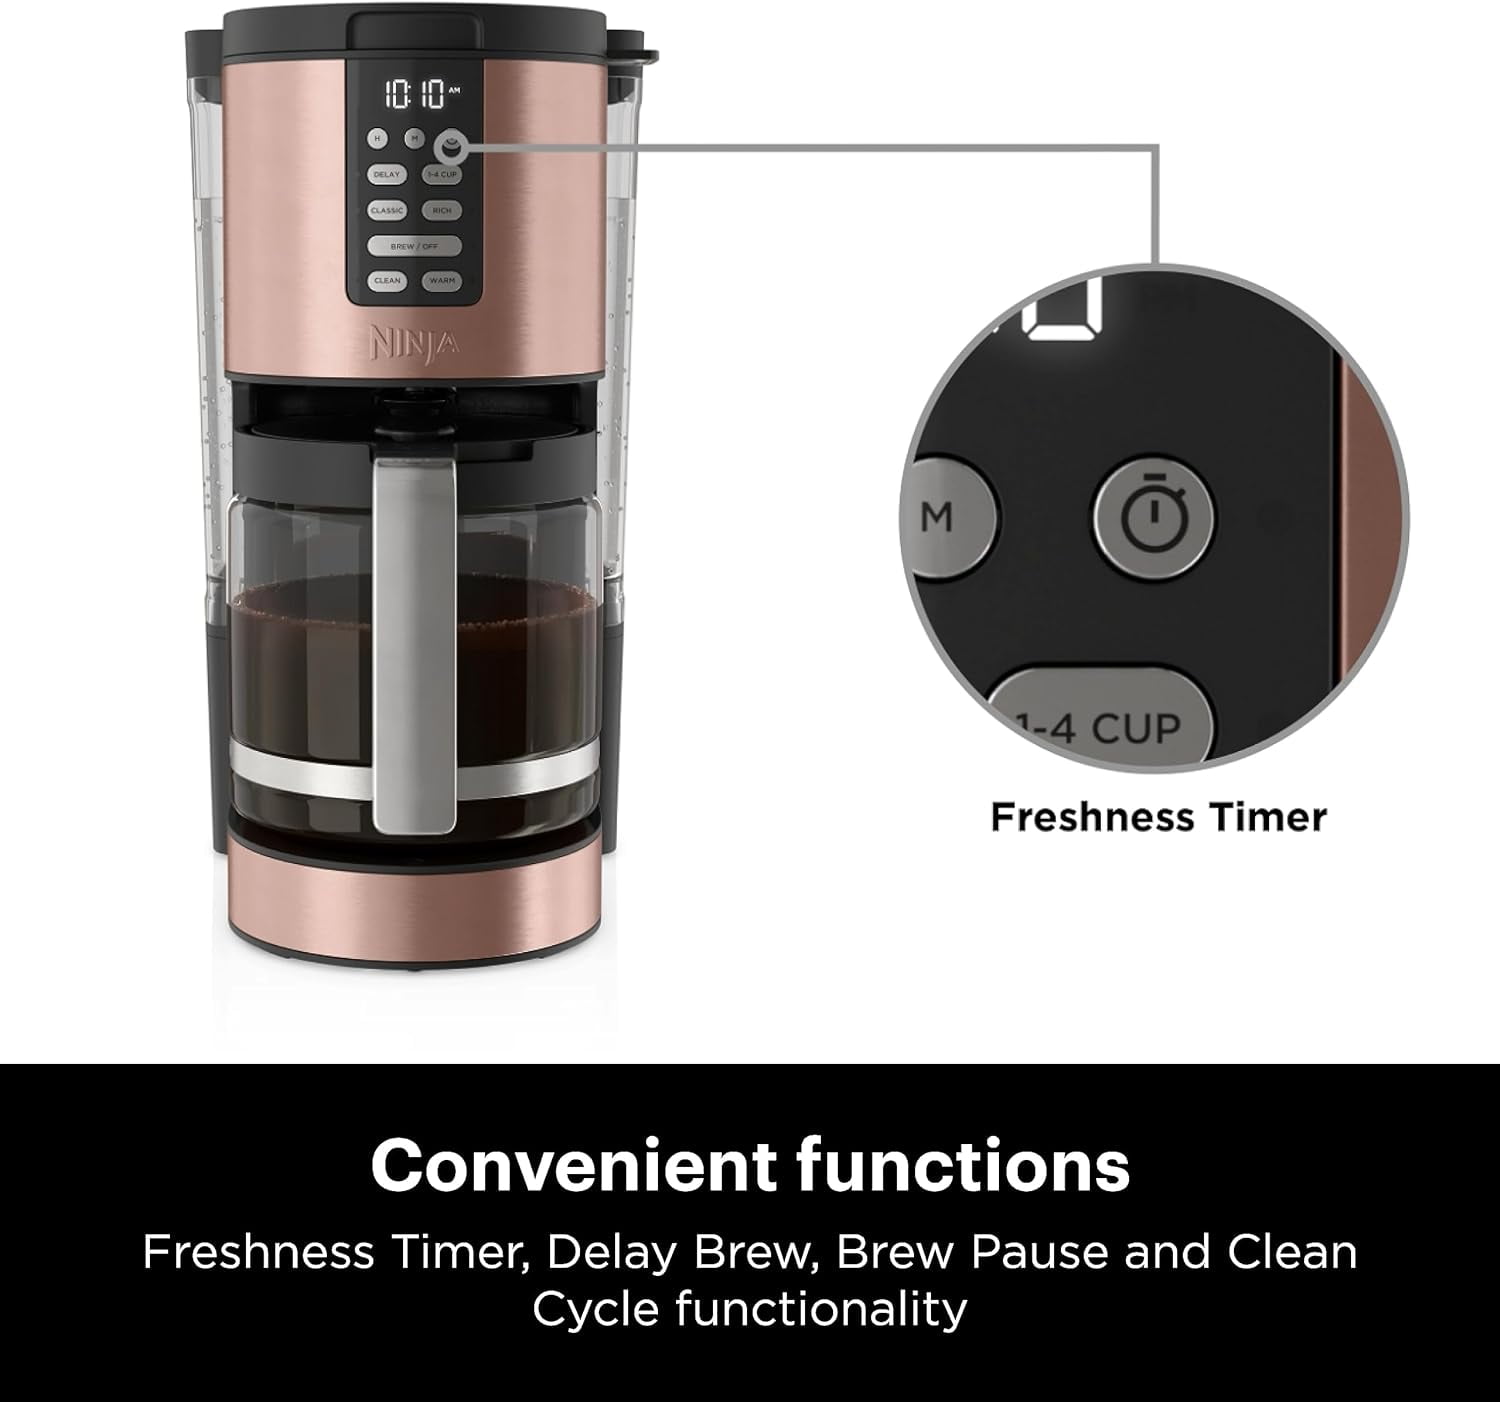 Ninja® 12-Cup Programmable Coffee Maker, Glass Carafe, Stainless Steel,  CE250 